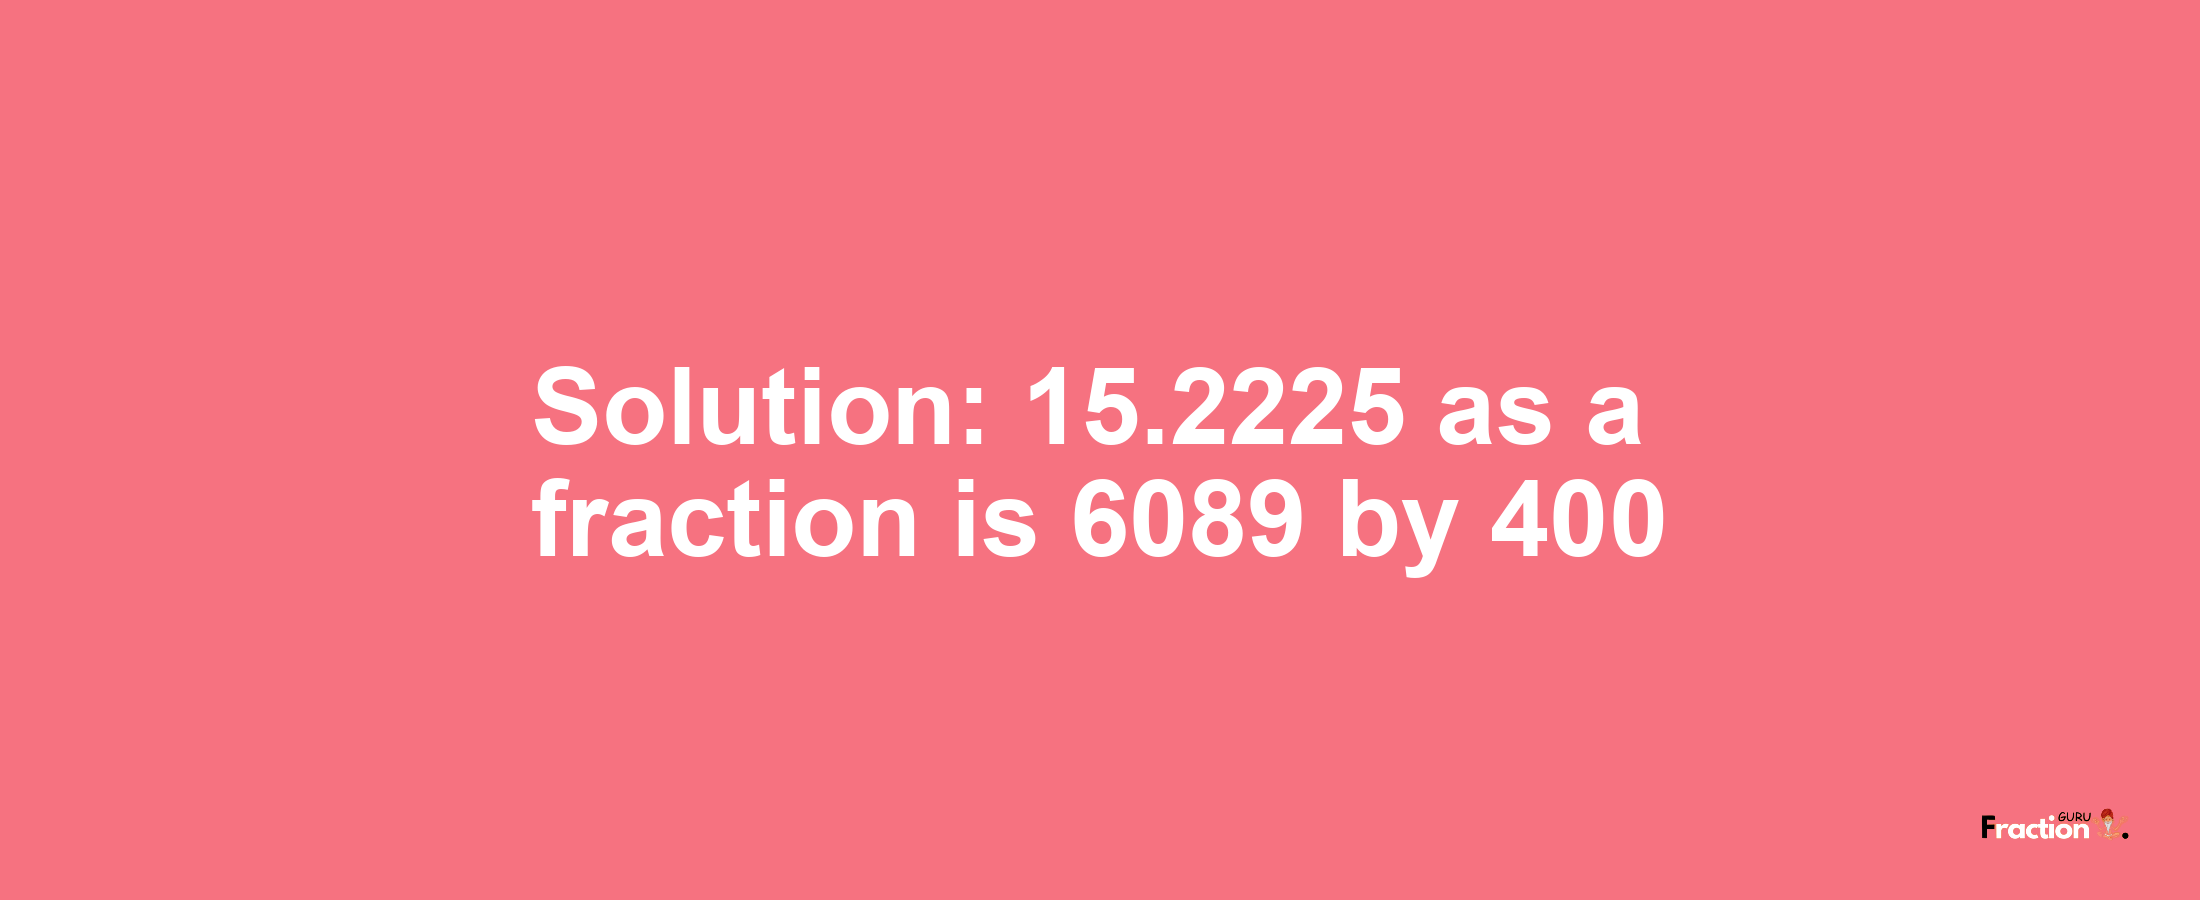 Solution:15.2225 as a fraction is 6089/400